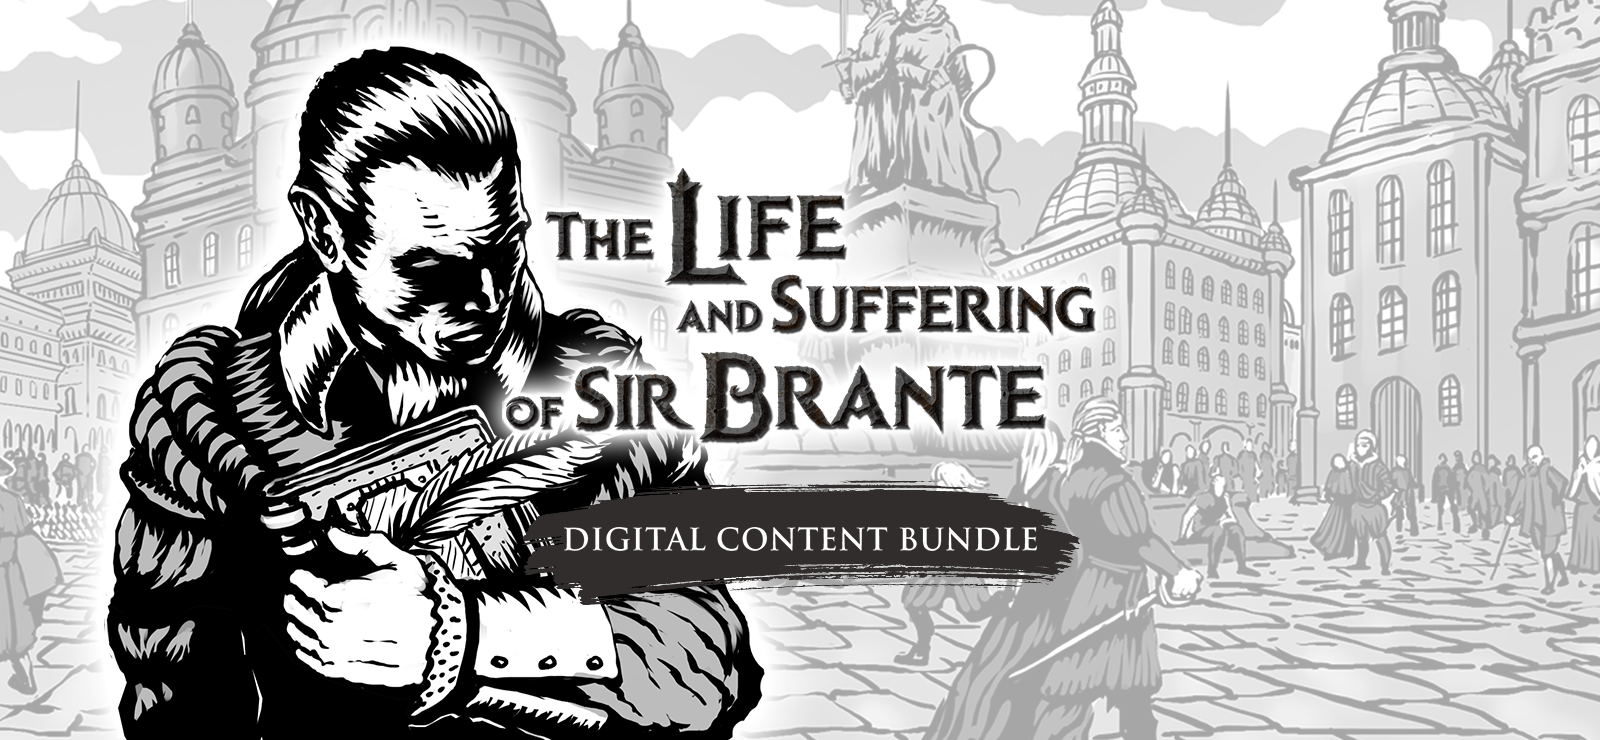 The Life And Suffering Of Sir Brante - Digital Content Bundle Upgrade